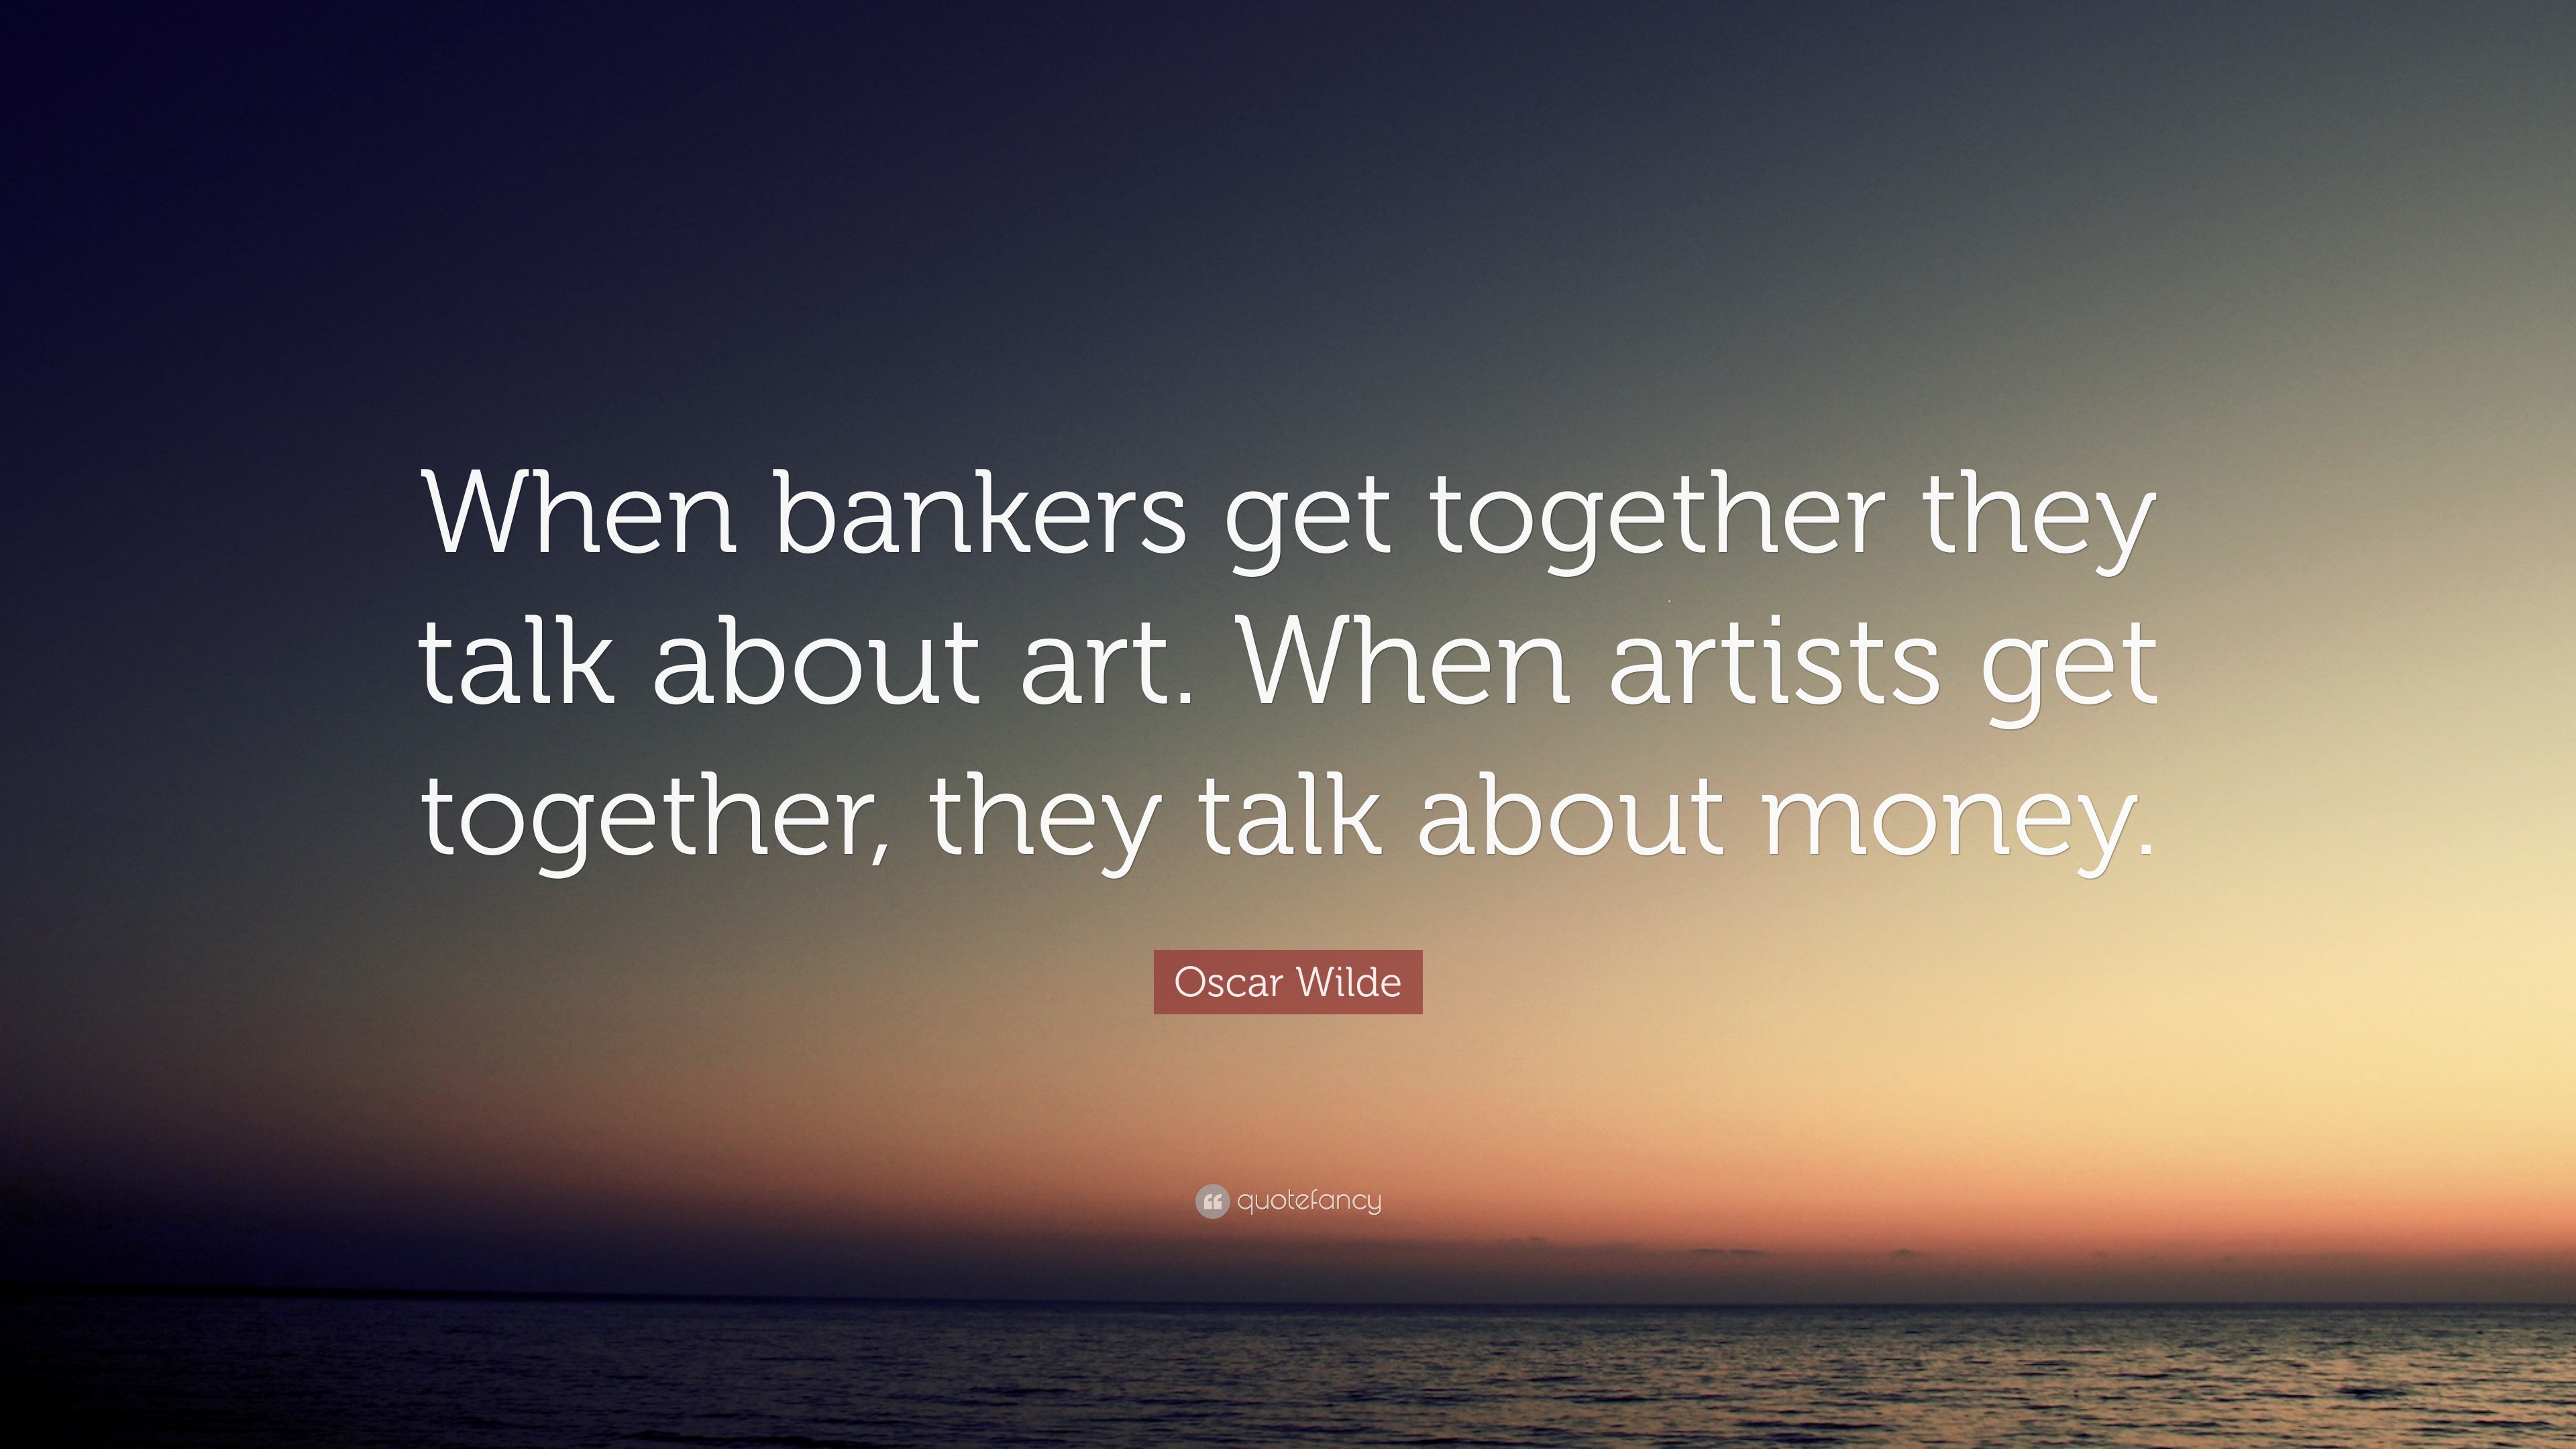 Oscar Wilde Quote: “When bankers get together they talk about art. When